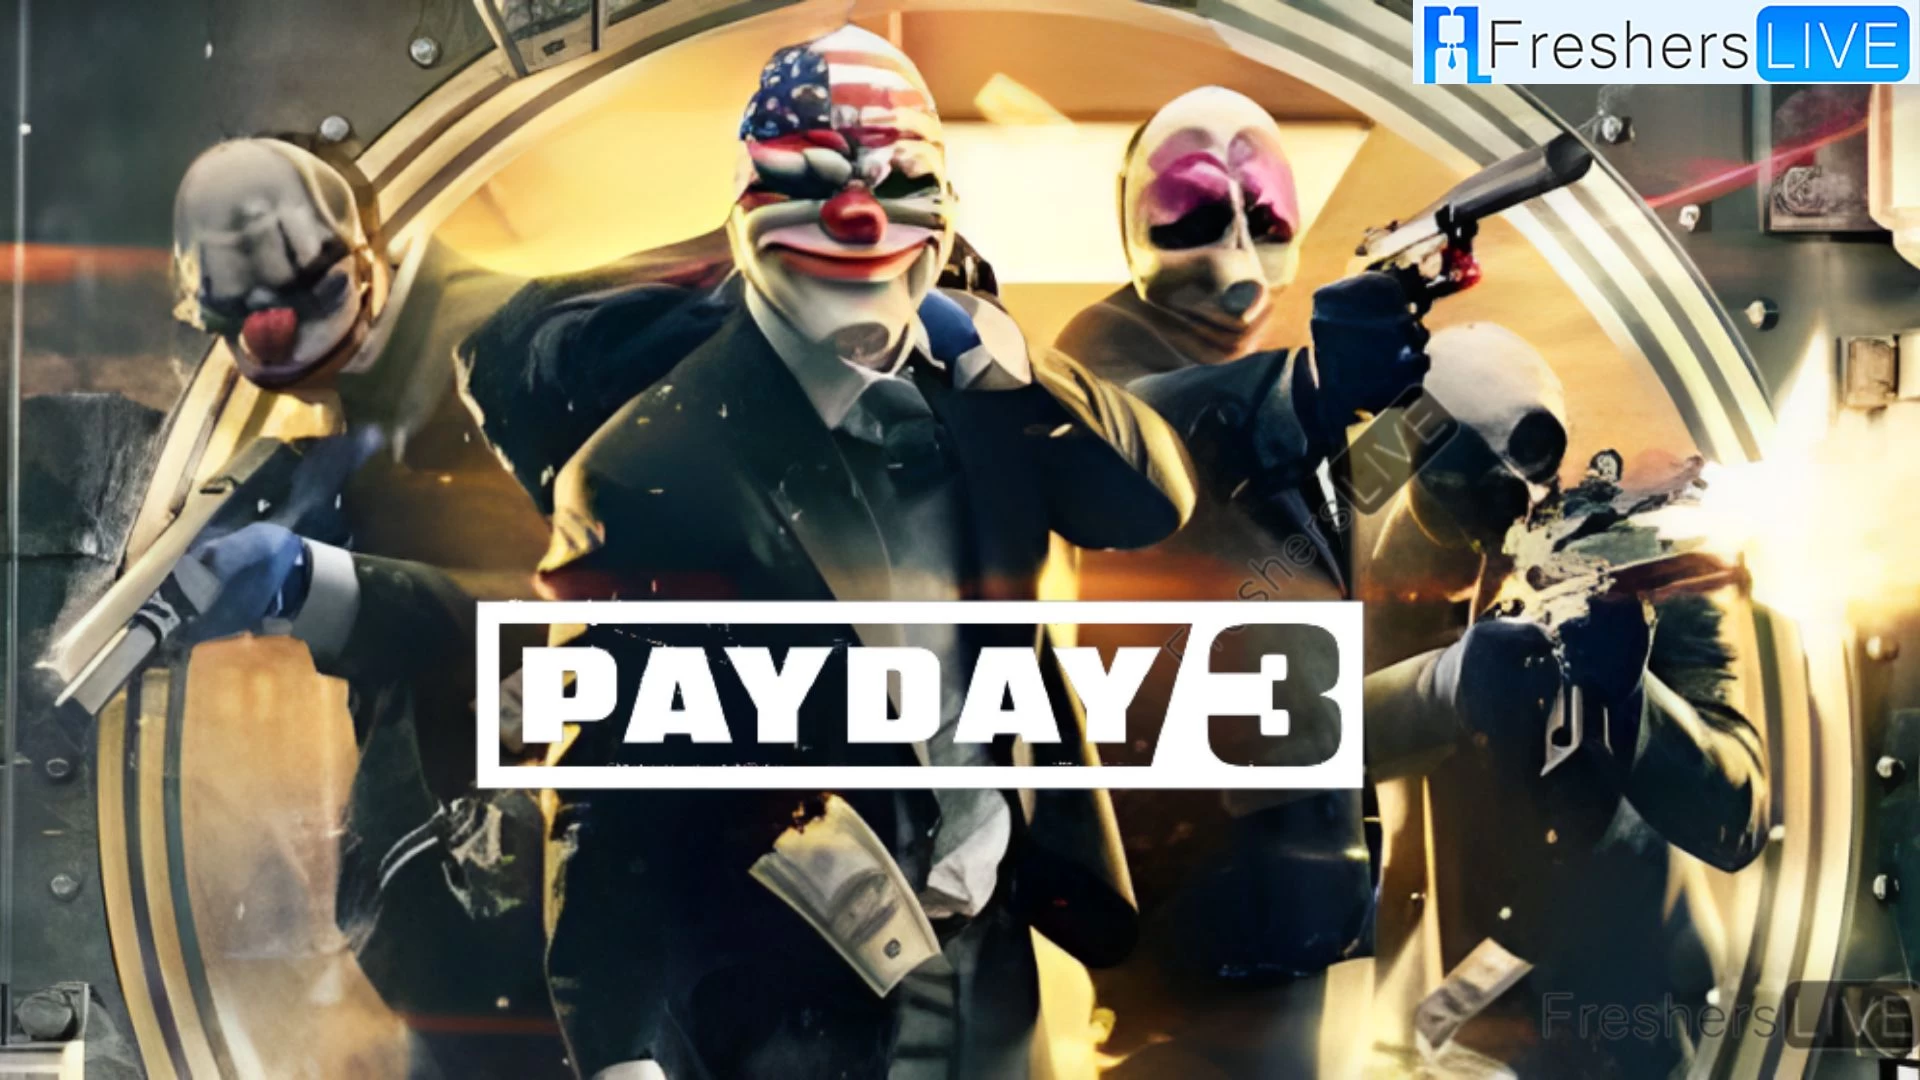 Payday 3 Not Finding Game, How to Fix Payday 3 Not Finding Game?